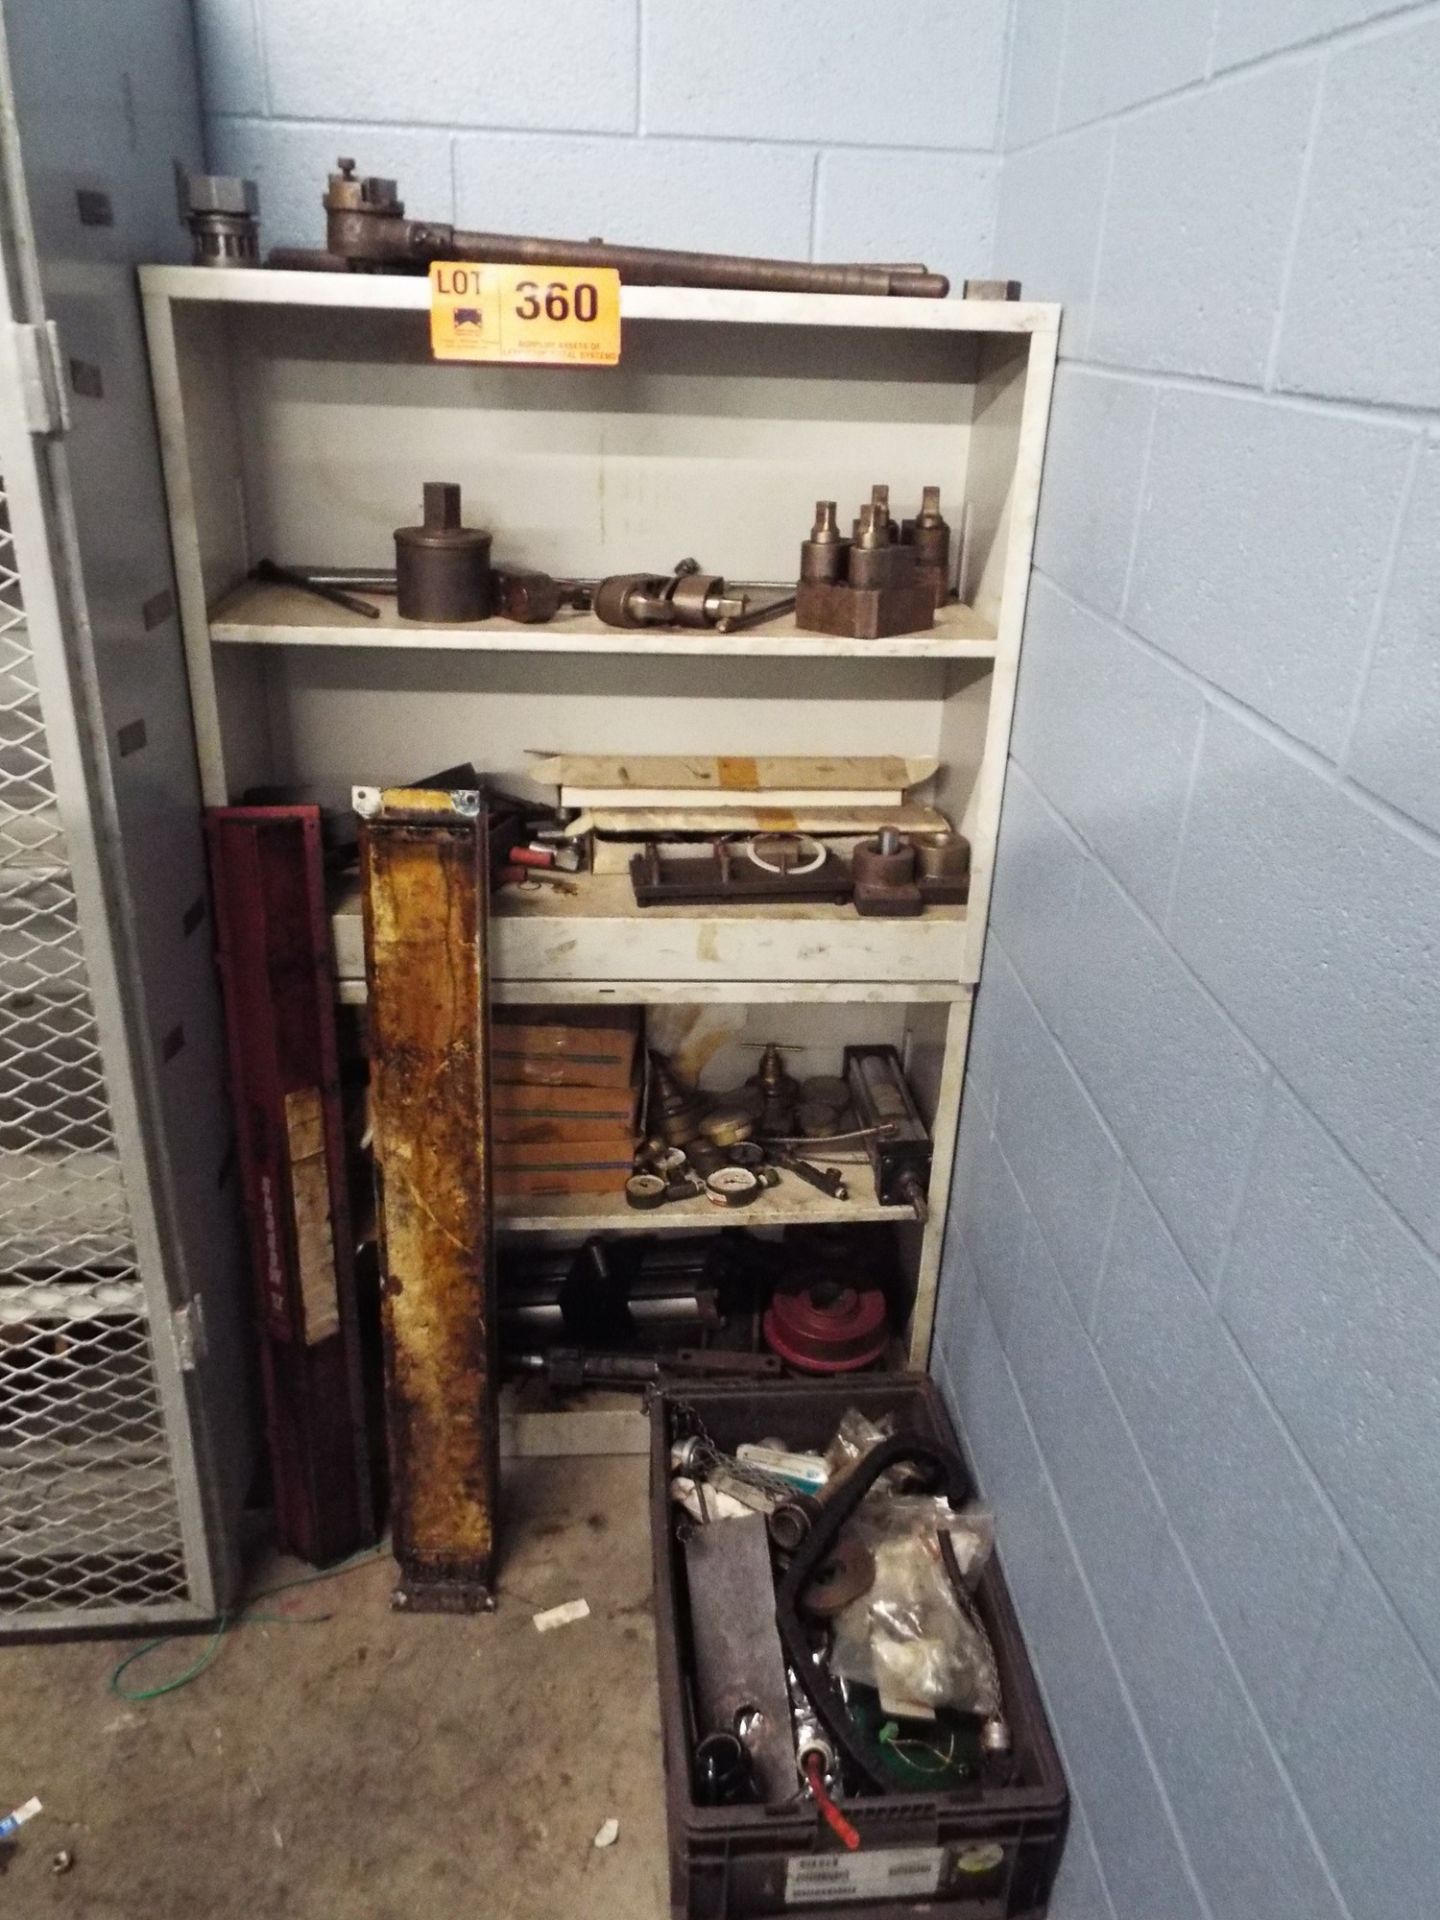 LOT/ SHELF WITH CONTENTS - TOOLING, SPARE PARTS